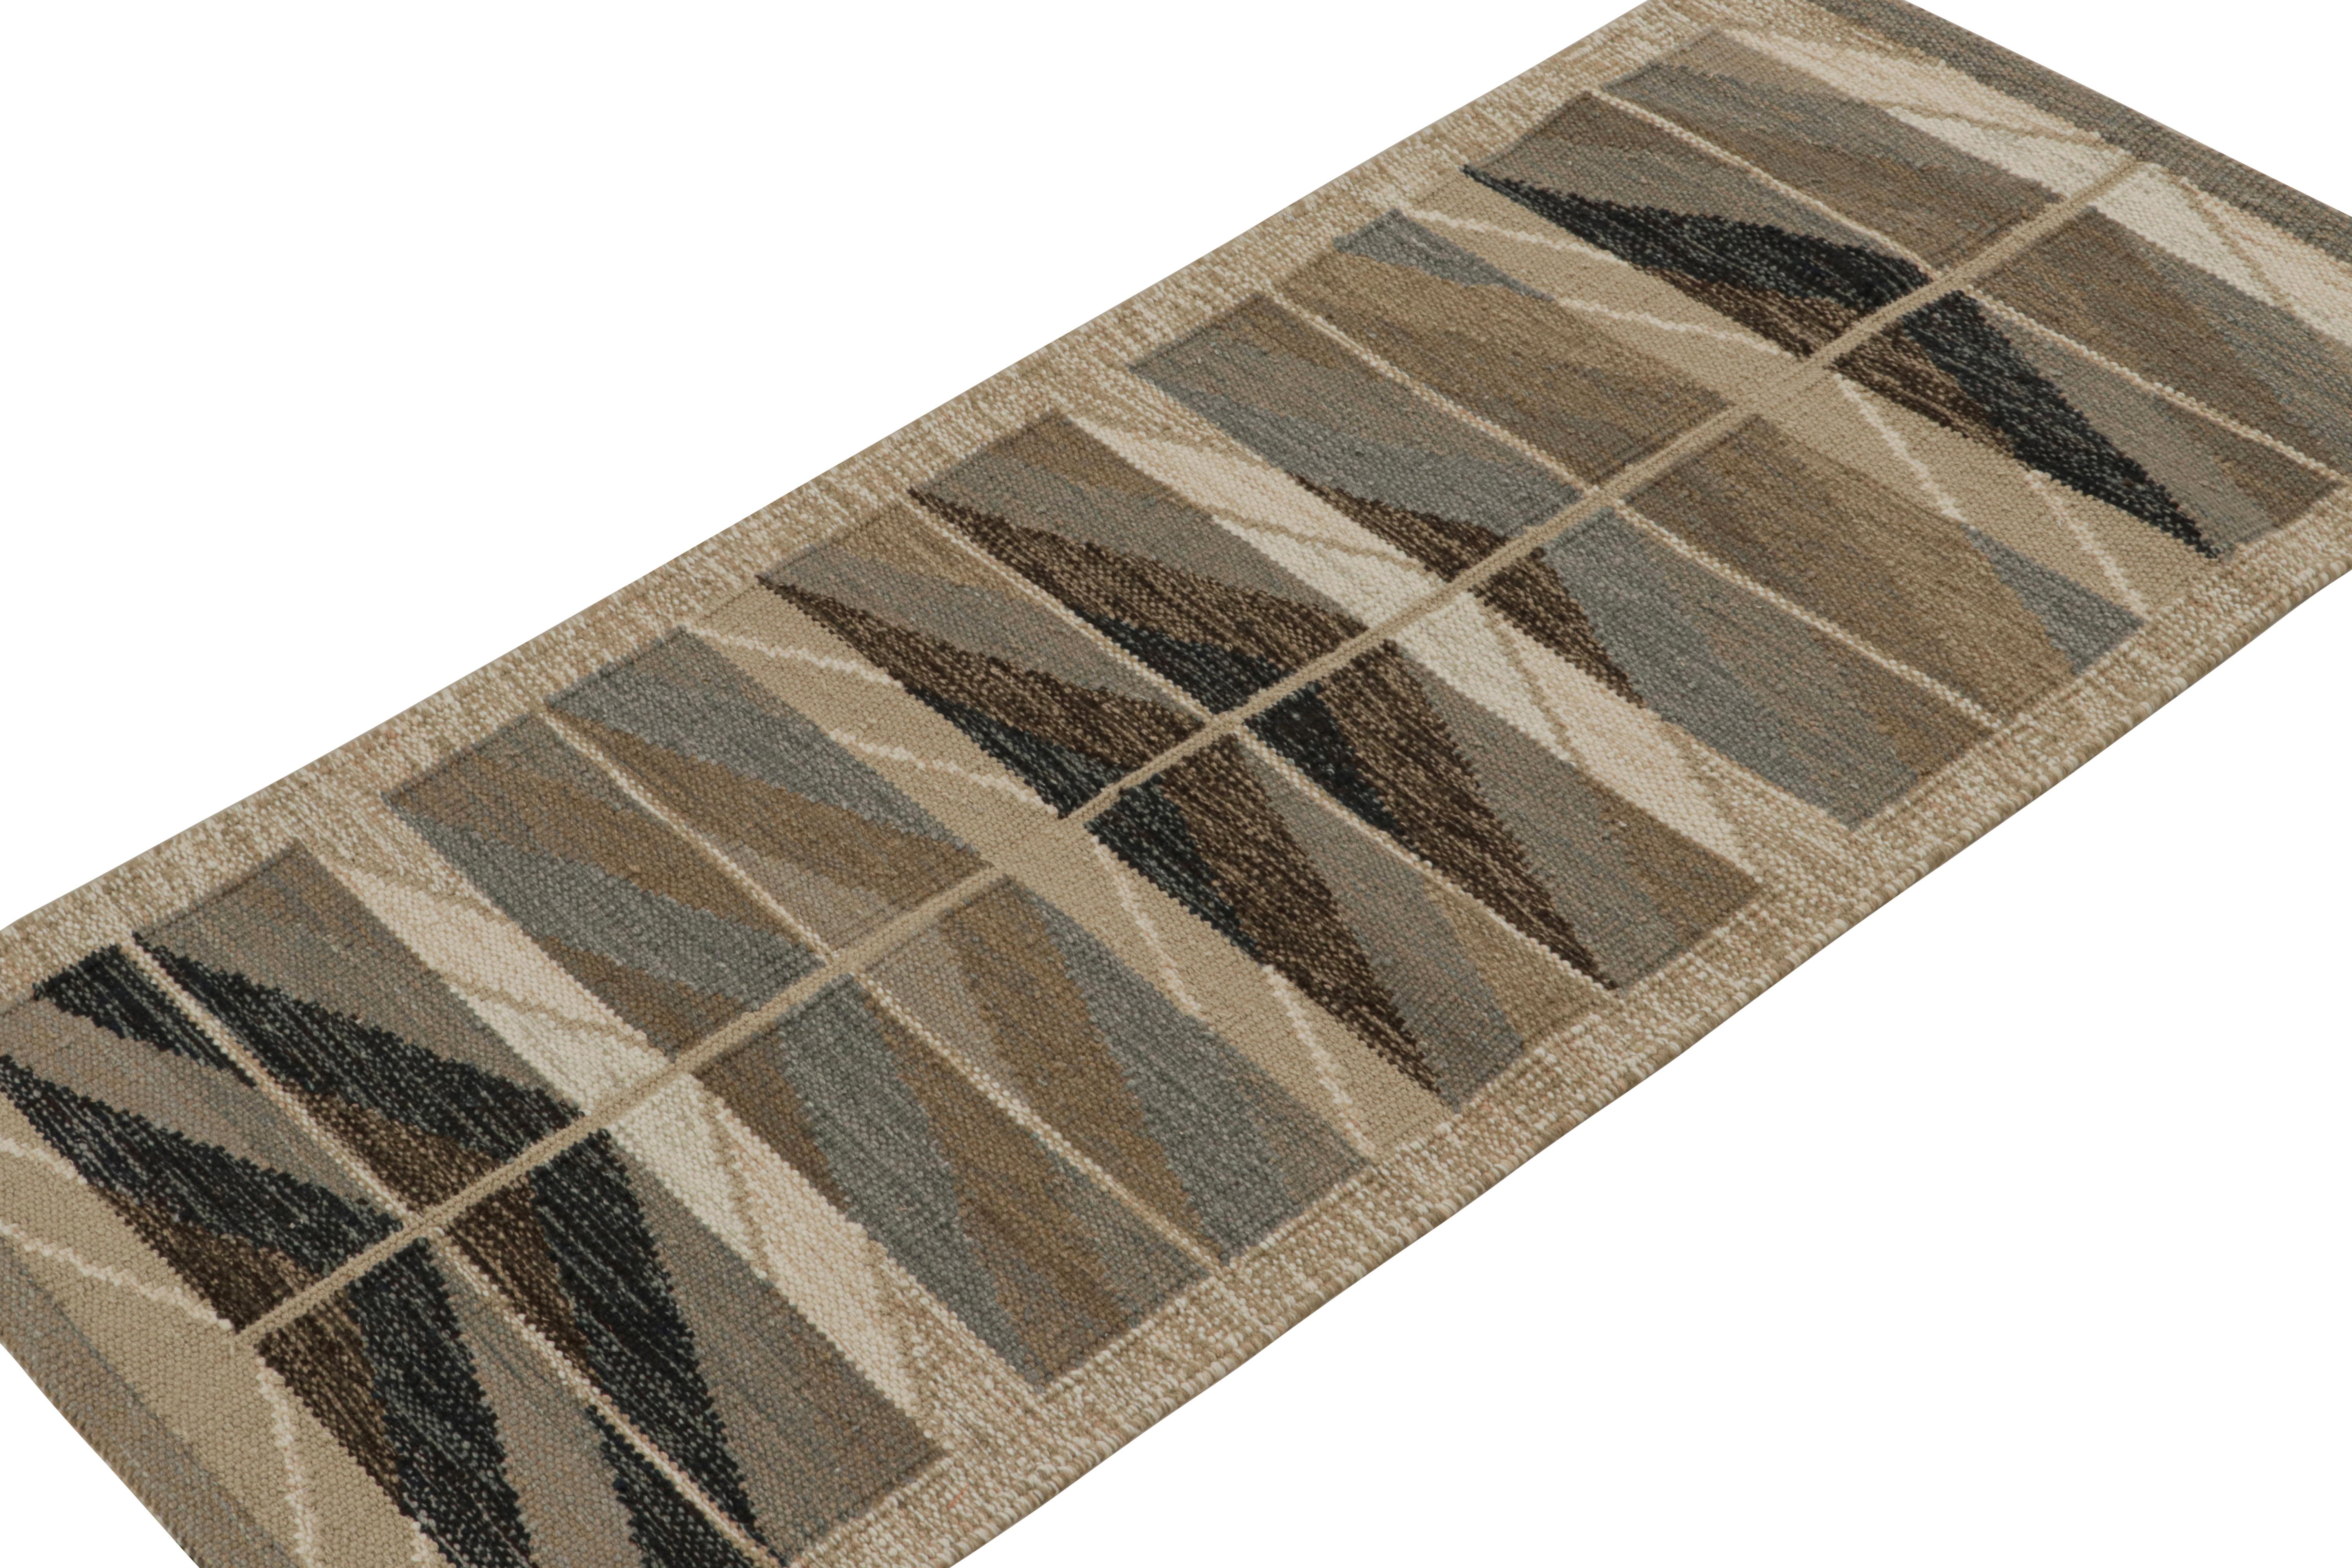 This 3x7 runner rug is a Swedish style kilim from the Scandinavian rug collection by Rug & Kilim. Handwoven in wool, cotton and natural yarns, this flatweave is inspired by vintage Swedish Deco Rollakan and Rya rugs. 

On the Design: 

This runner